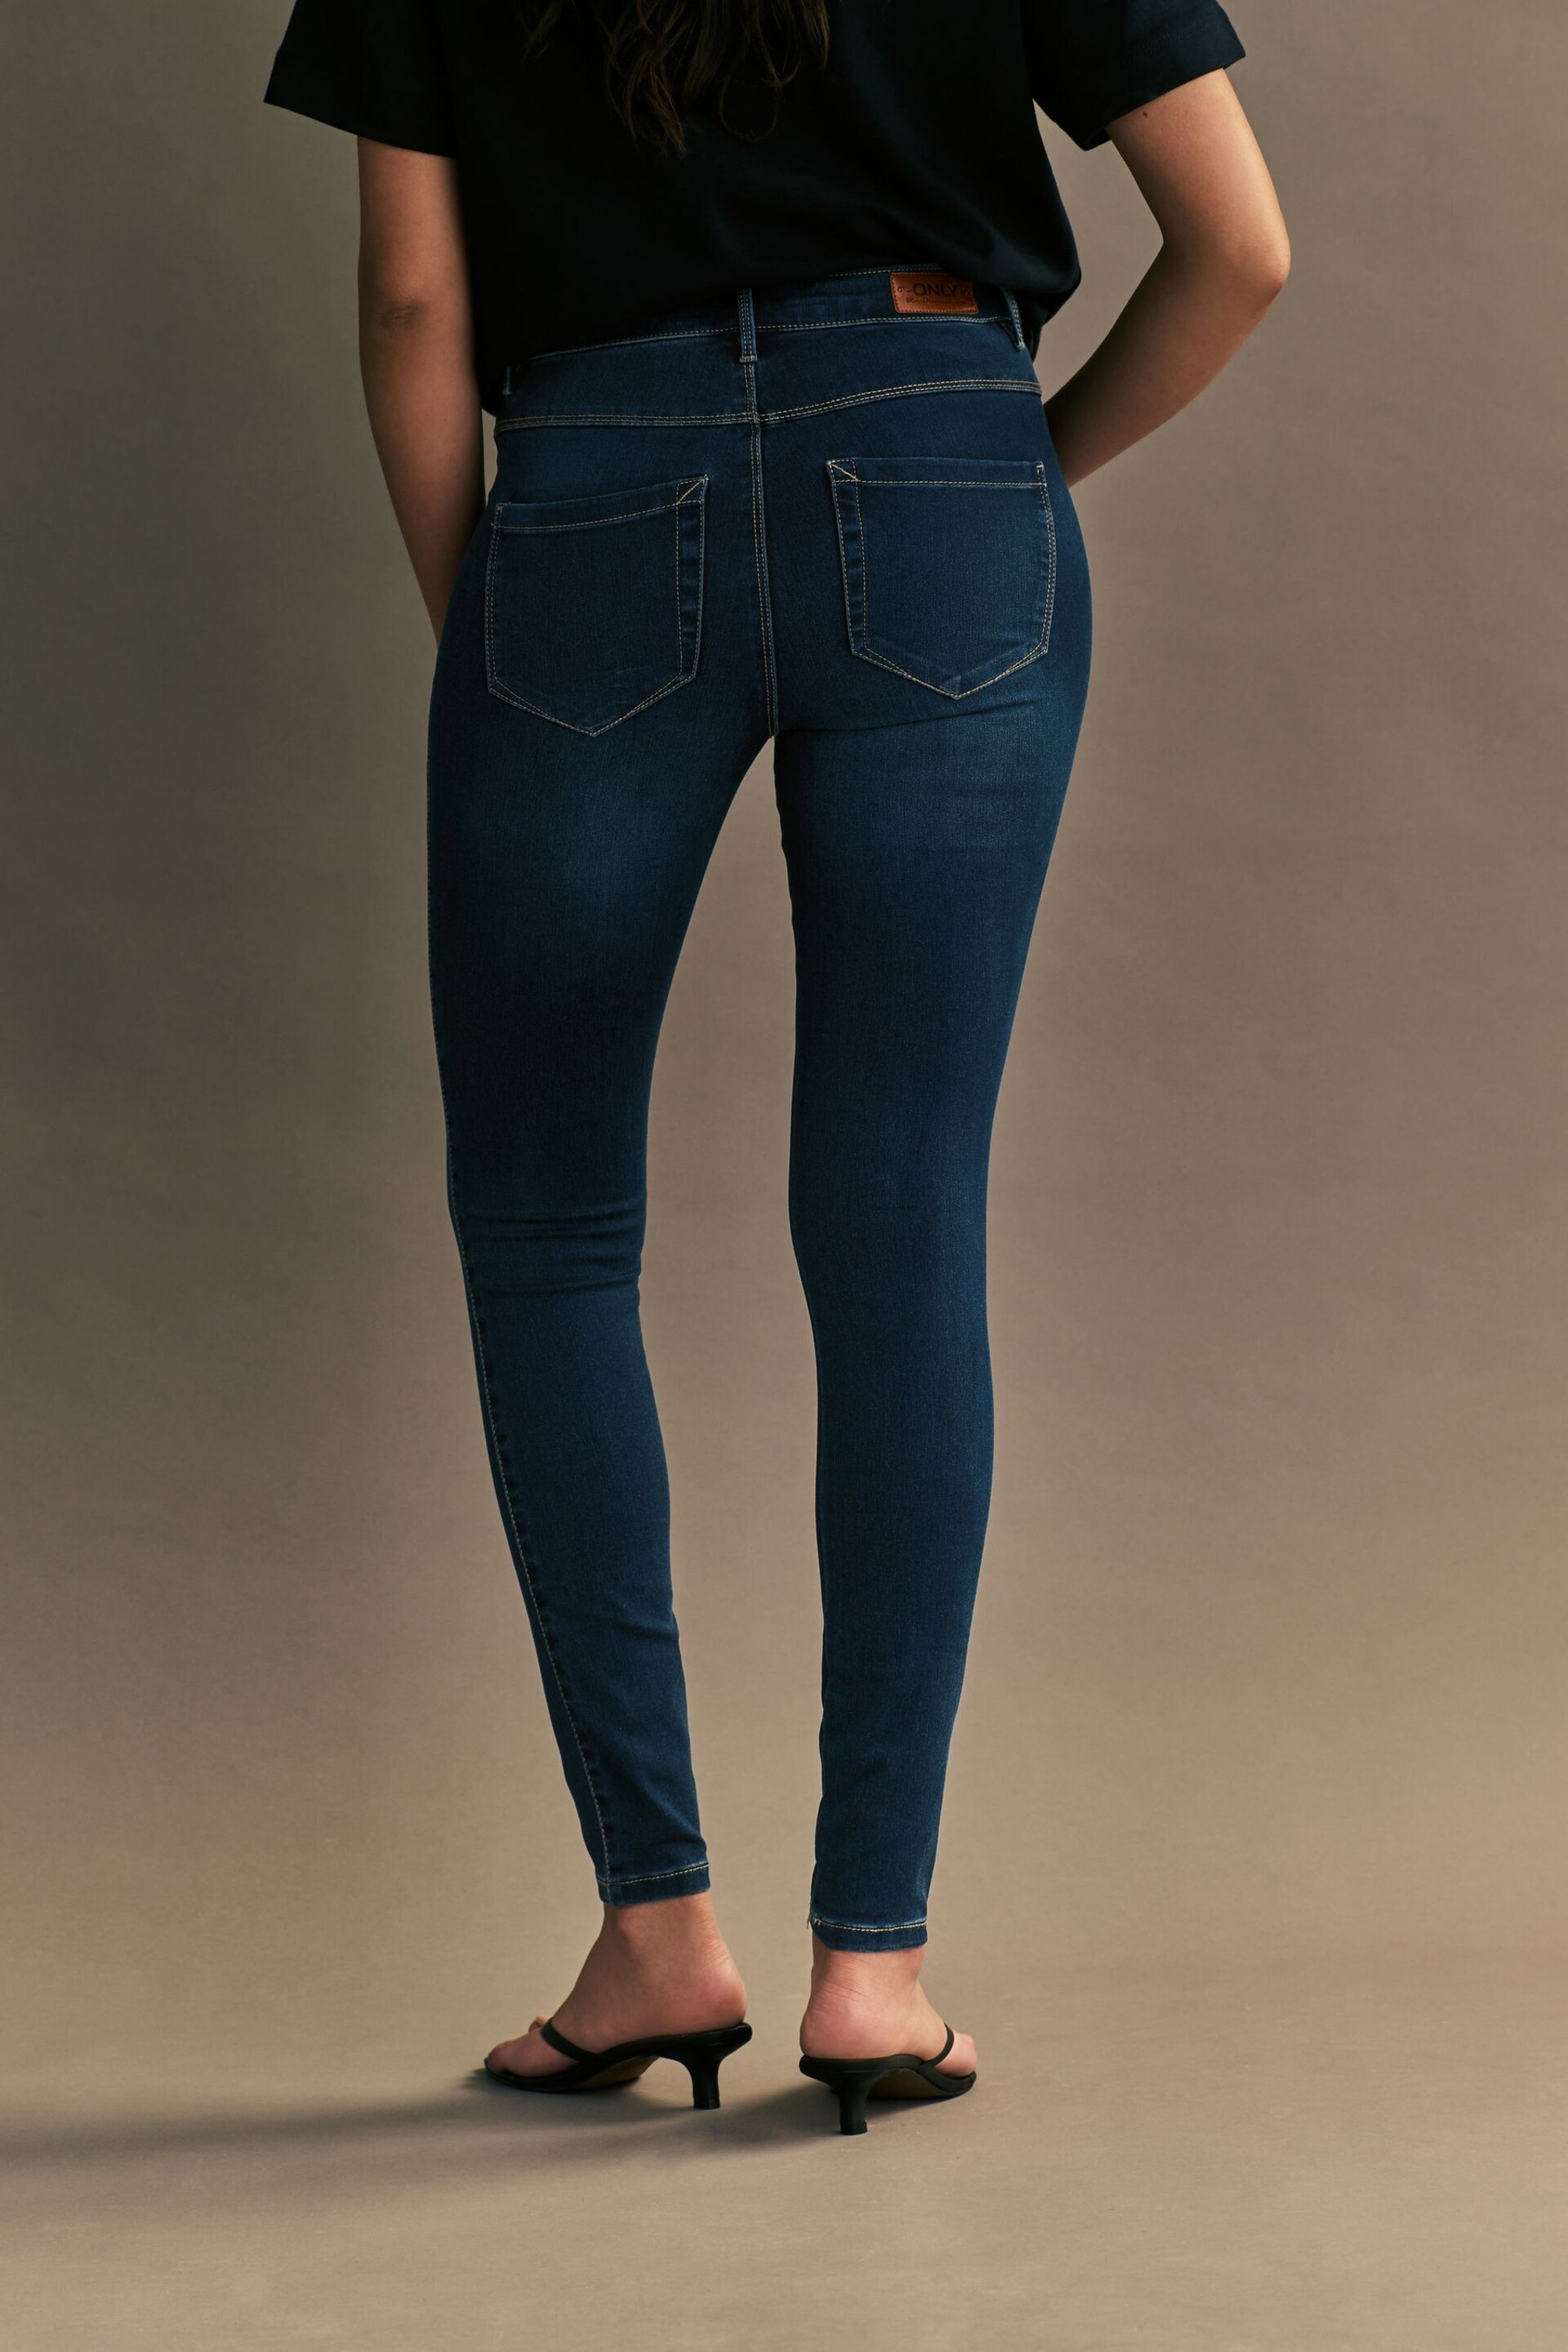 ONLY Blue High Waisted Stretch Skinny Royal Jeans - Image 2 of 7